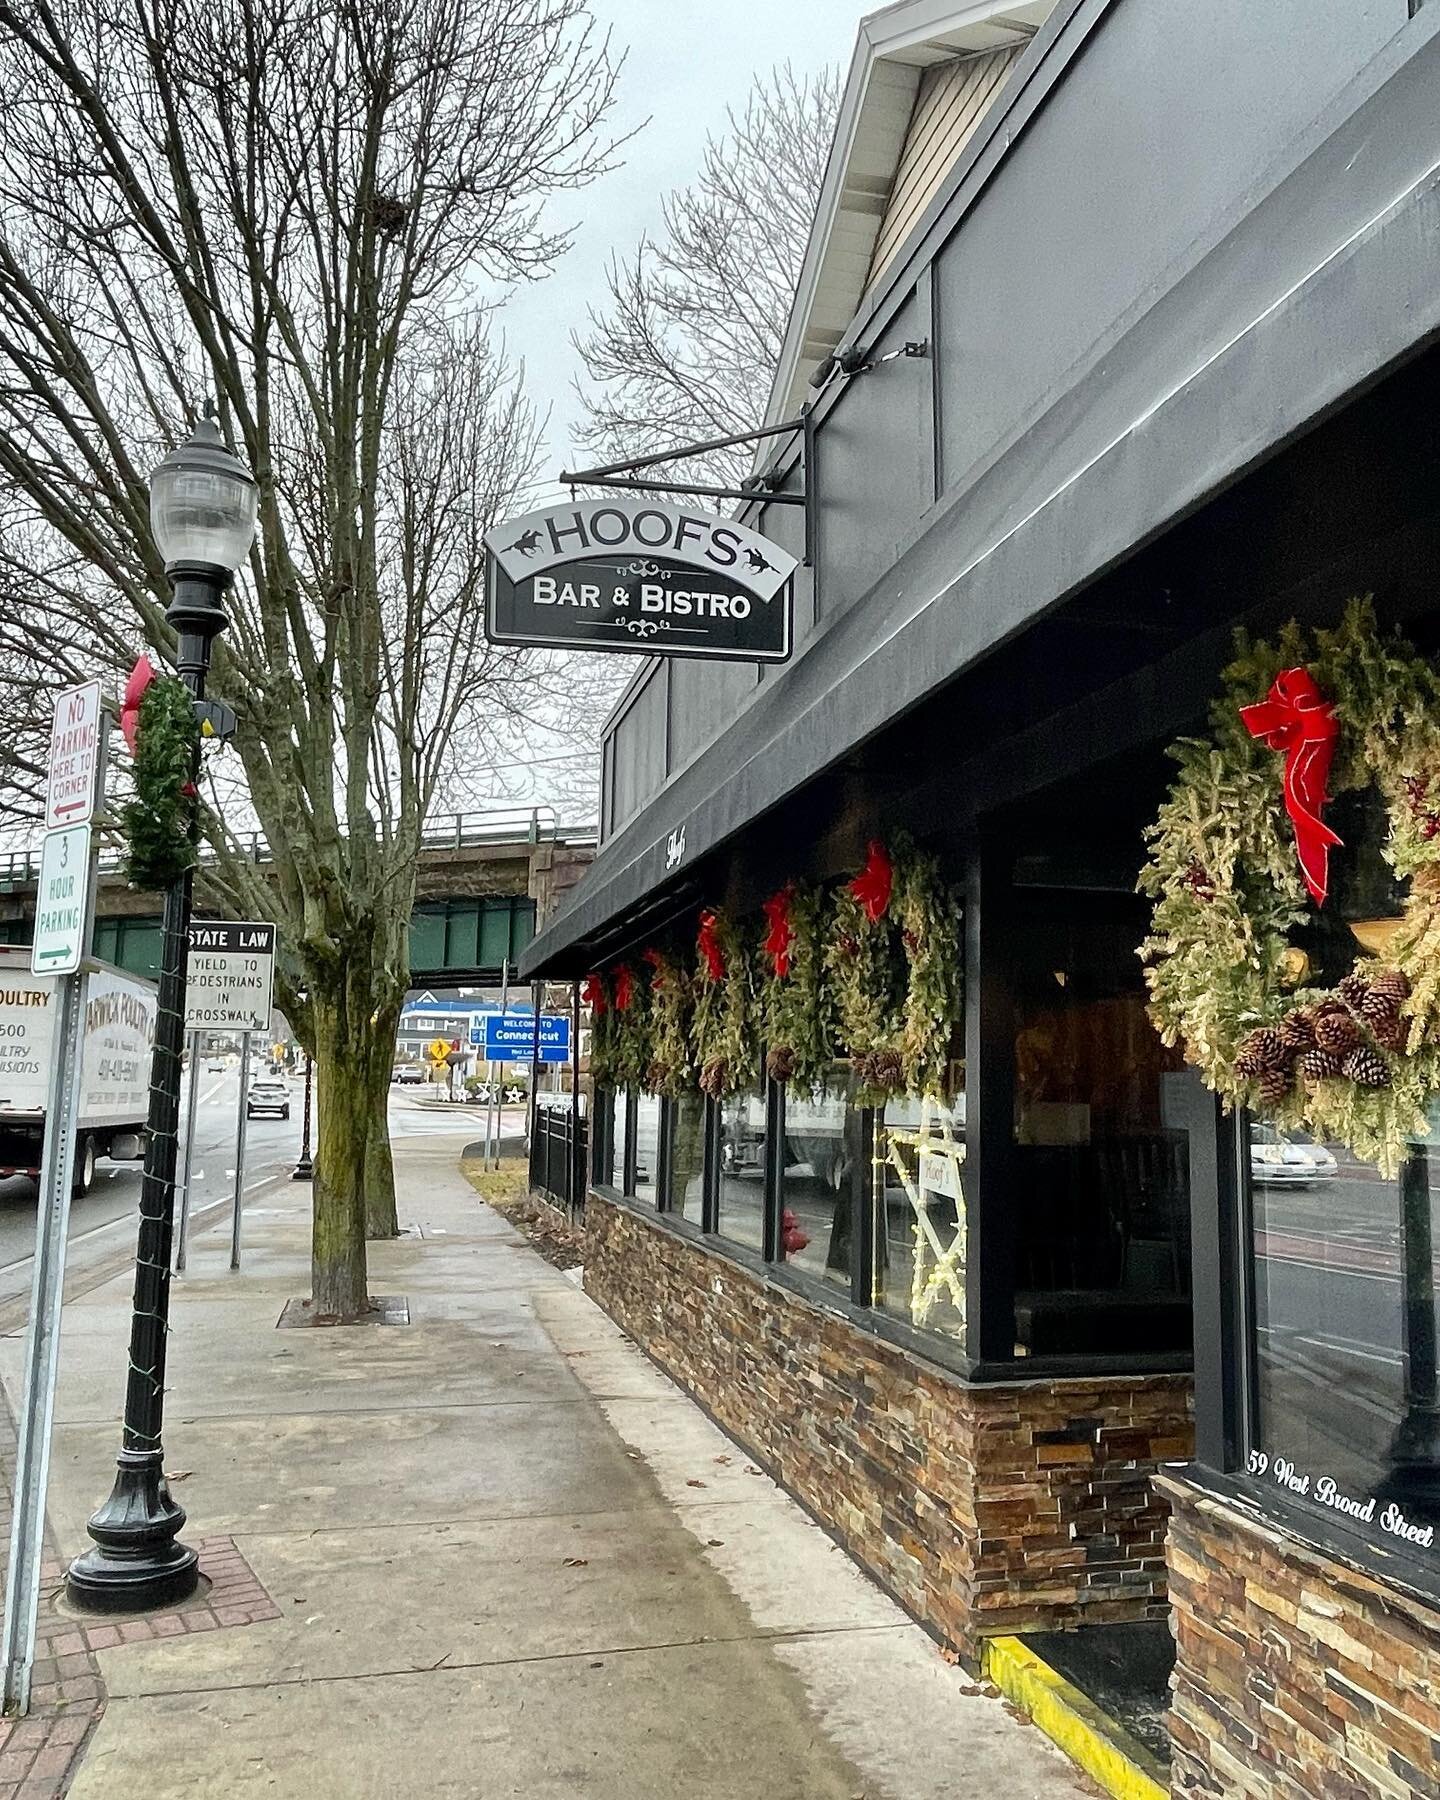 #supportsmallbusiness 

We recently did some work for our friends @hoofsct! 

@hoofsct is an Italian Resturaunt located in downtown Pawcatuck. They offer a menu that reflects a mix of authentic Italian with a modern flare!🇮🇹

The owner Nick was a p